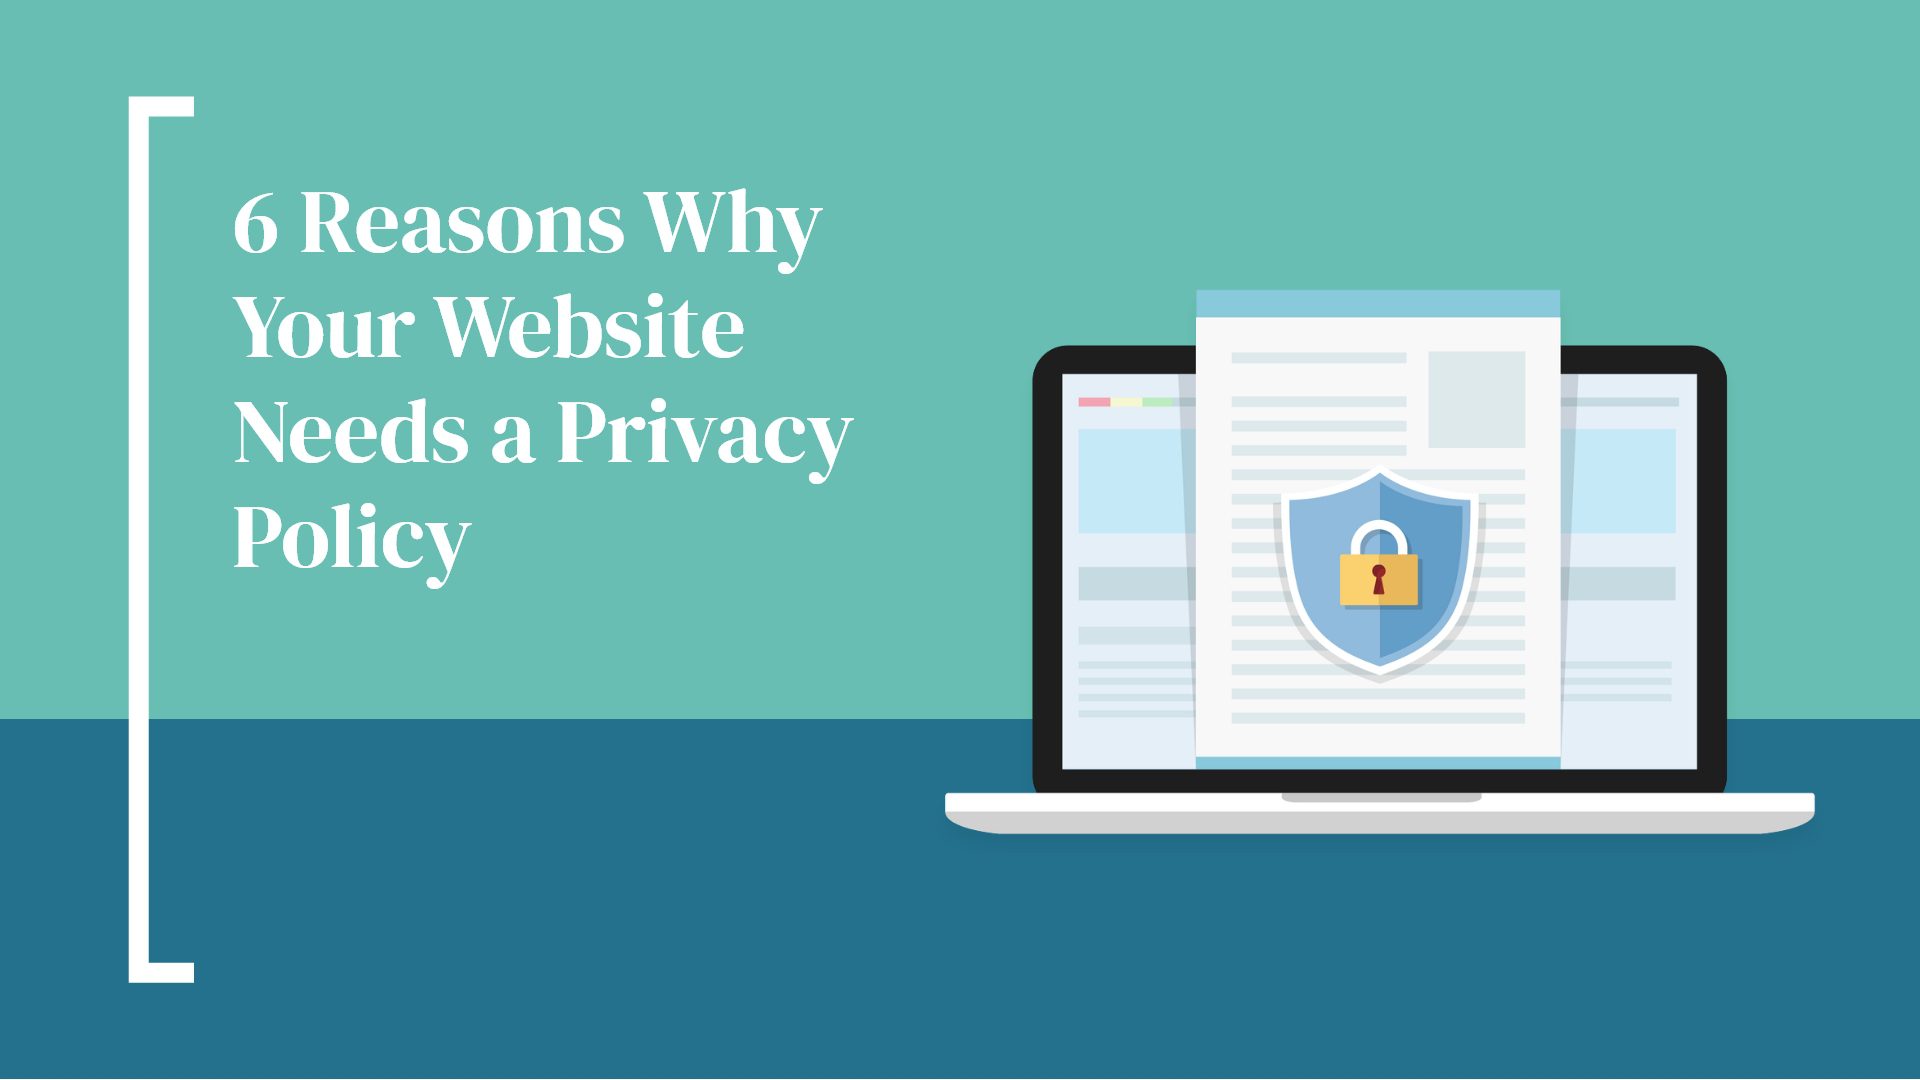 6 Reasons Why Your Website Needs a Privacy Policy